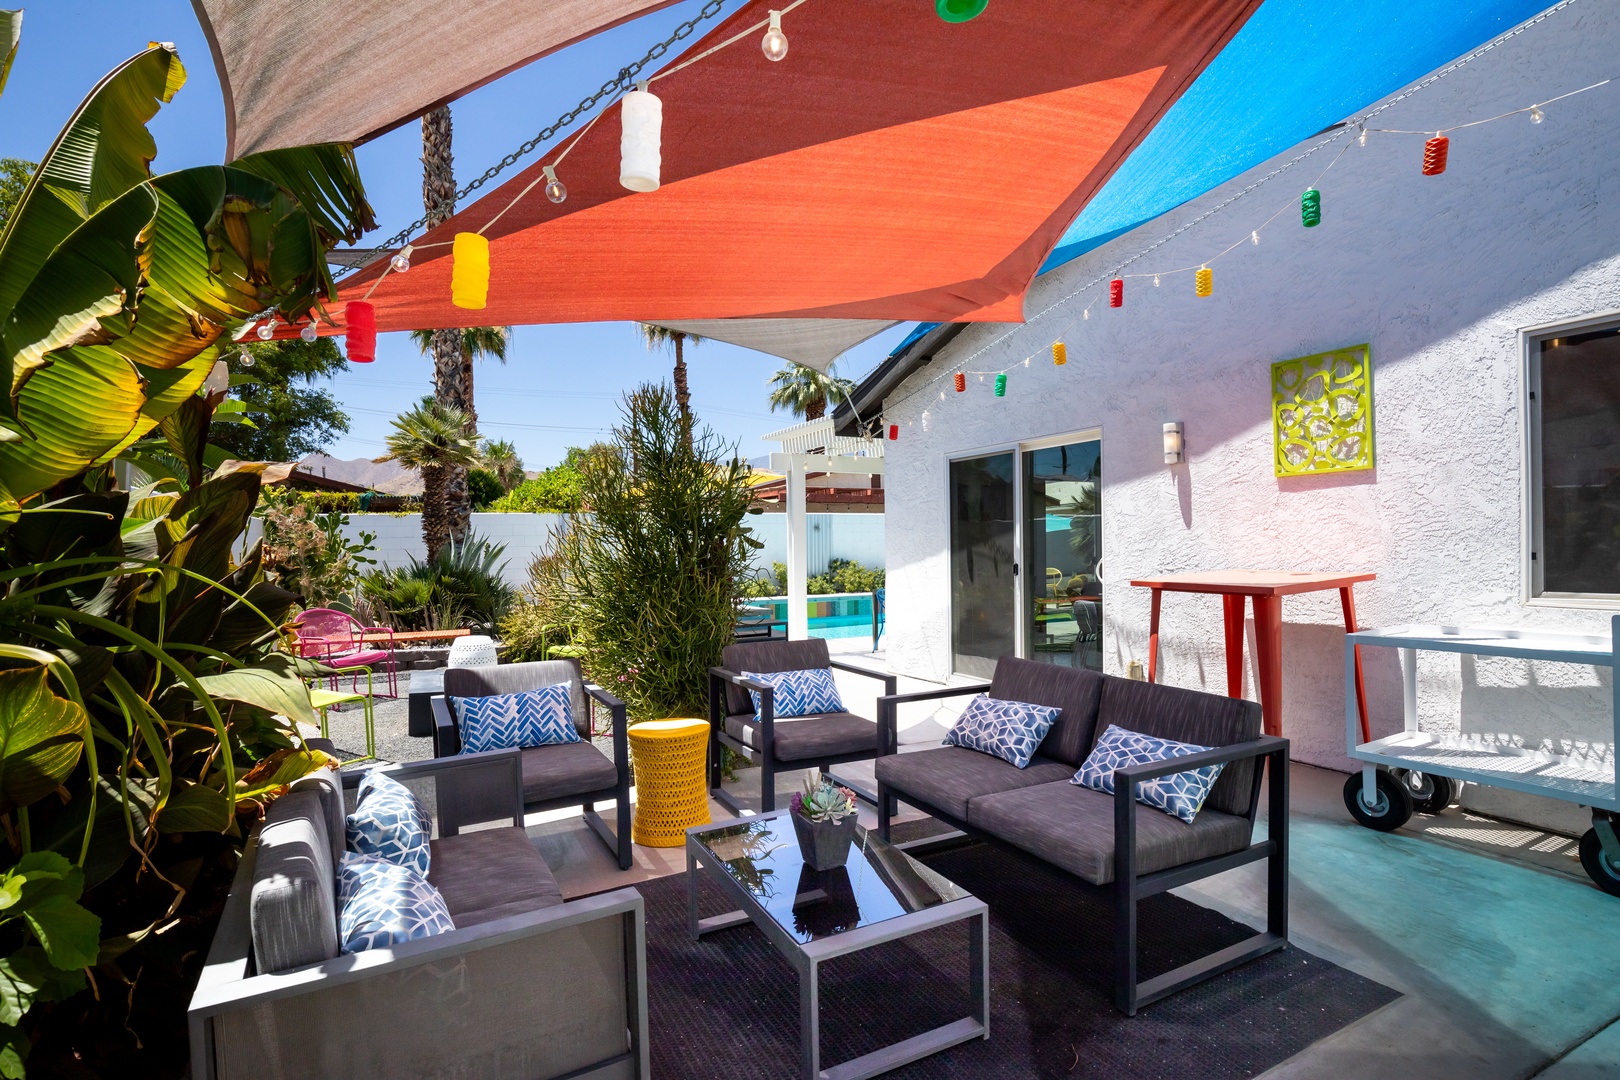 Enjoy visiting together in your own oasis under the shade sails